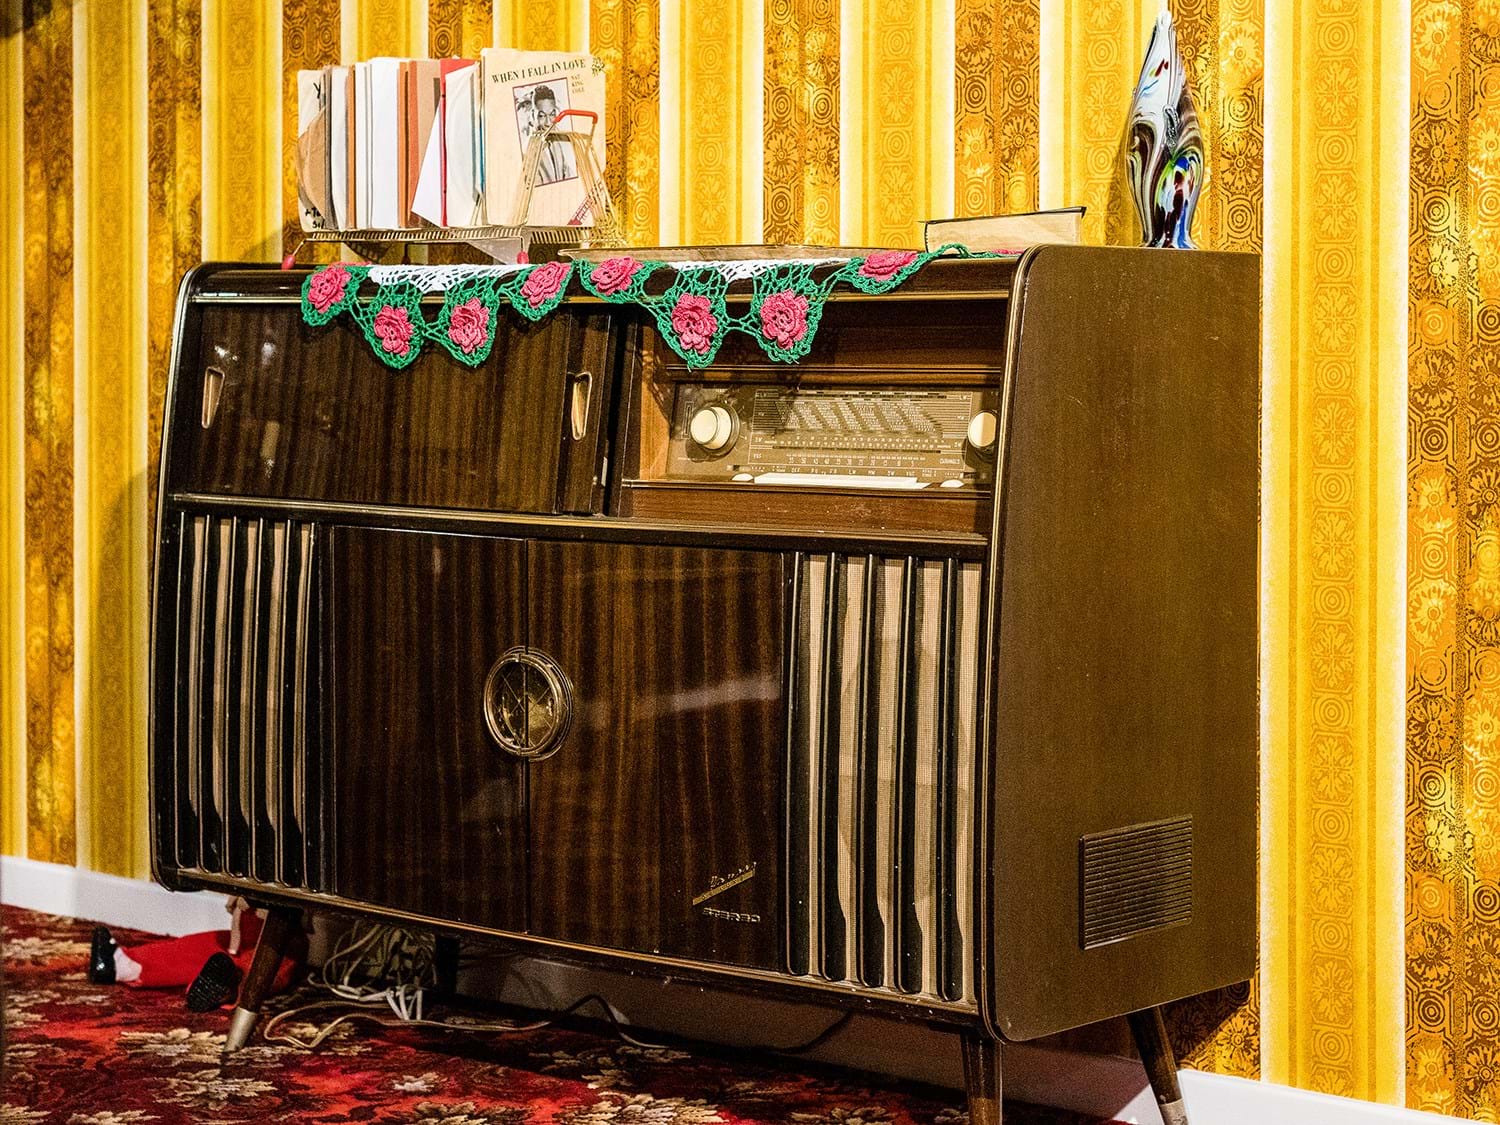 Free standing radiogram with 7 inch records on top, in a room with yellow wallpaper